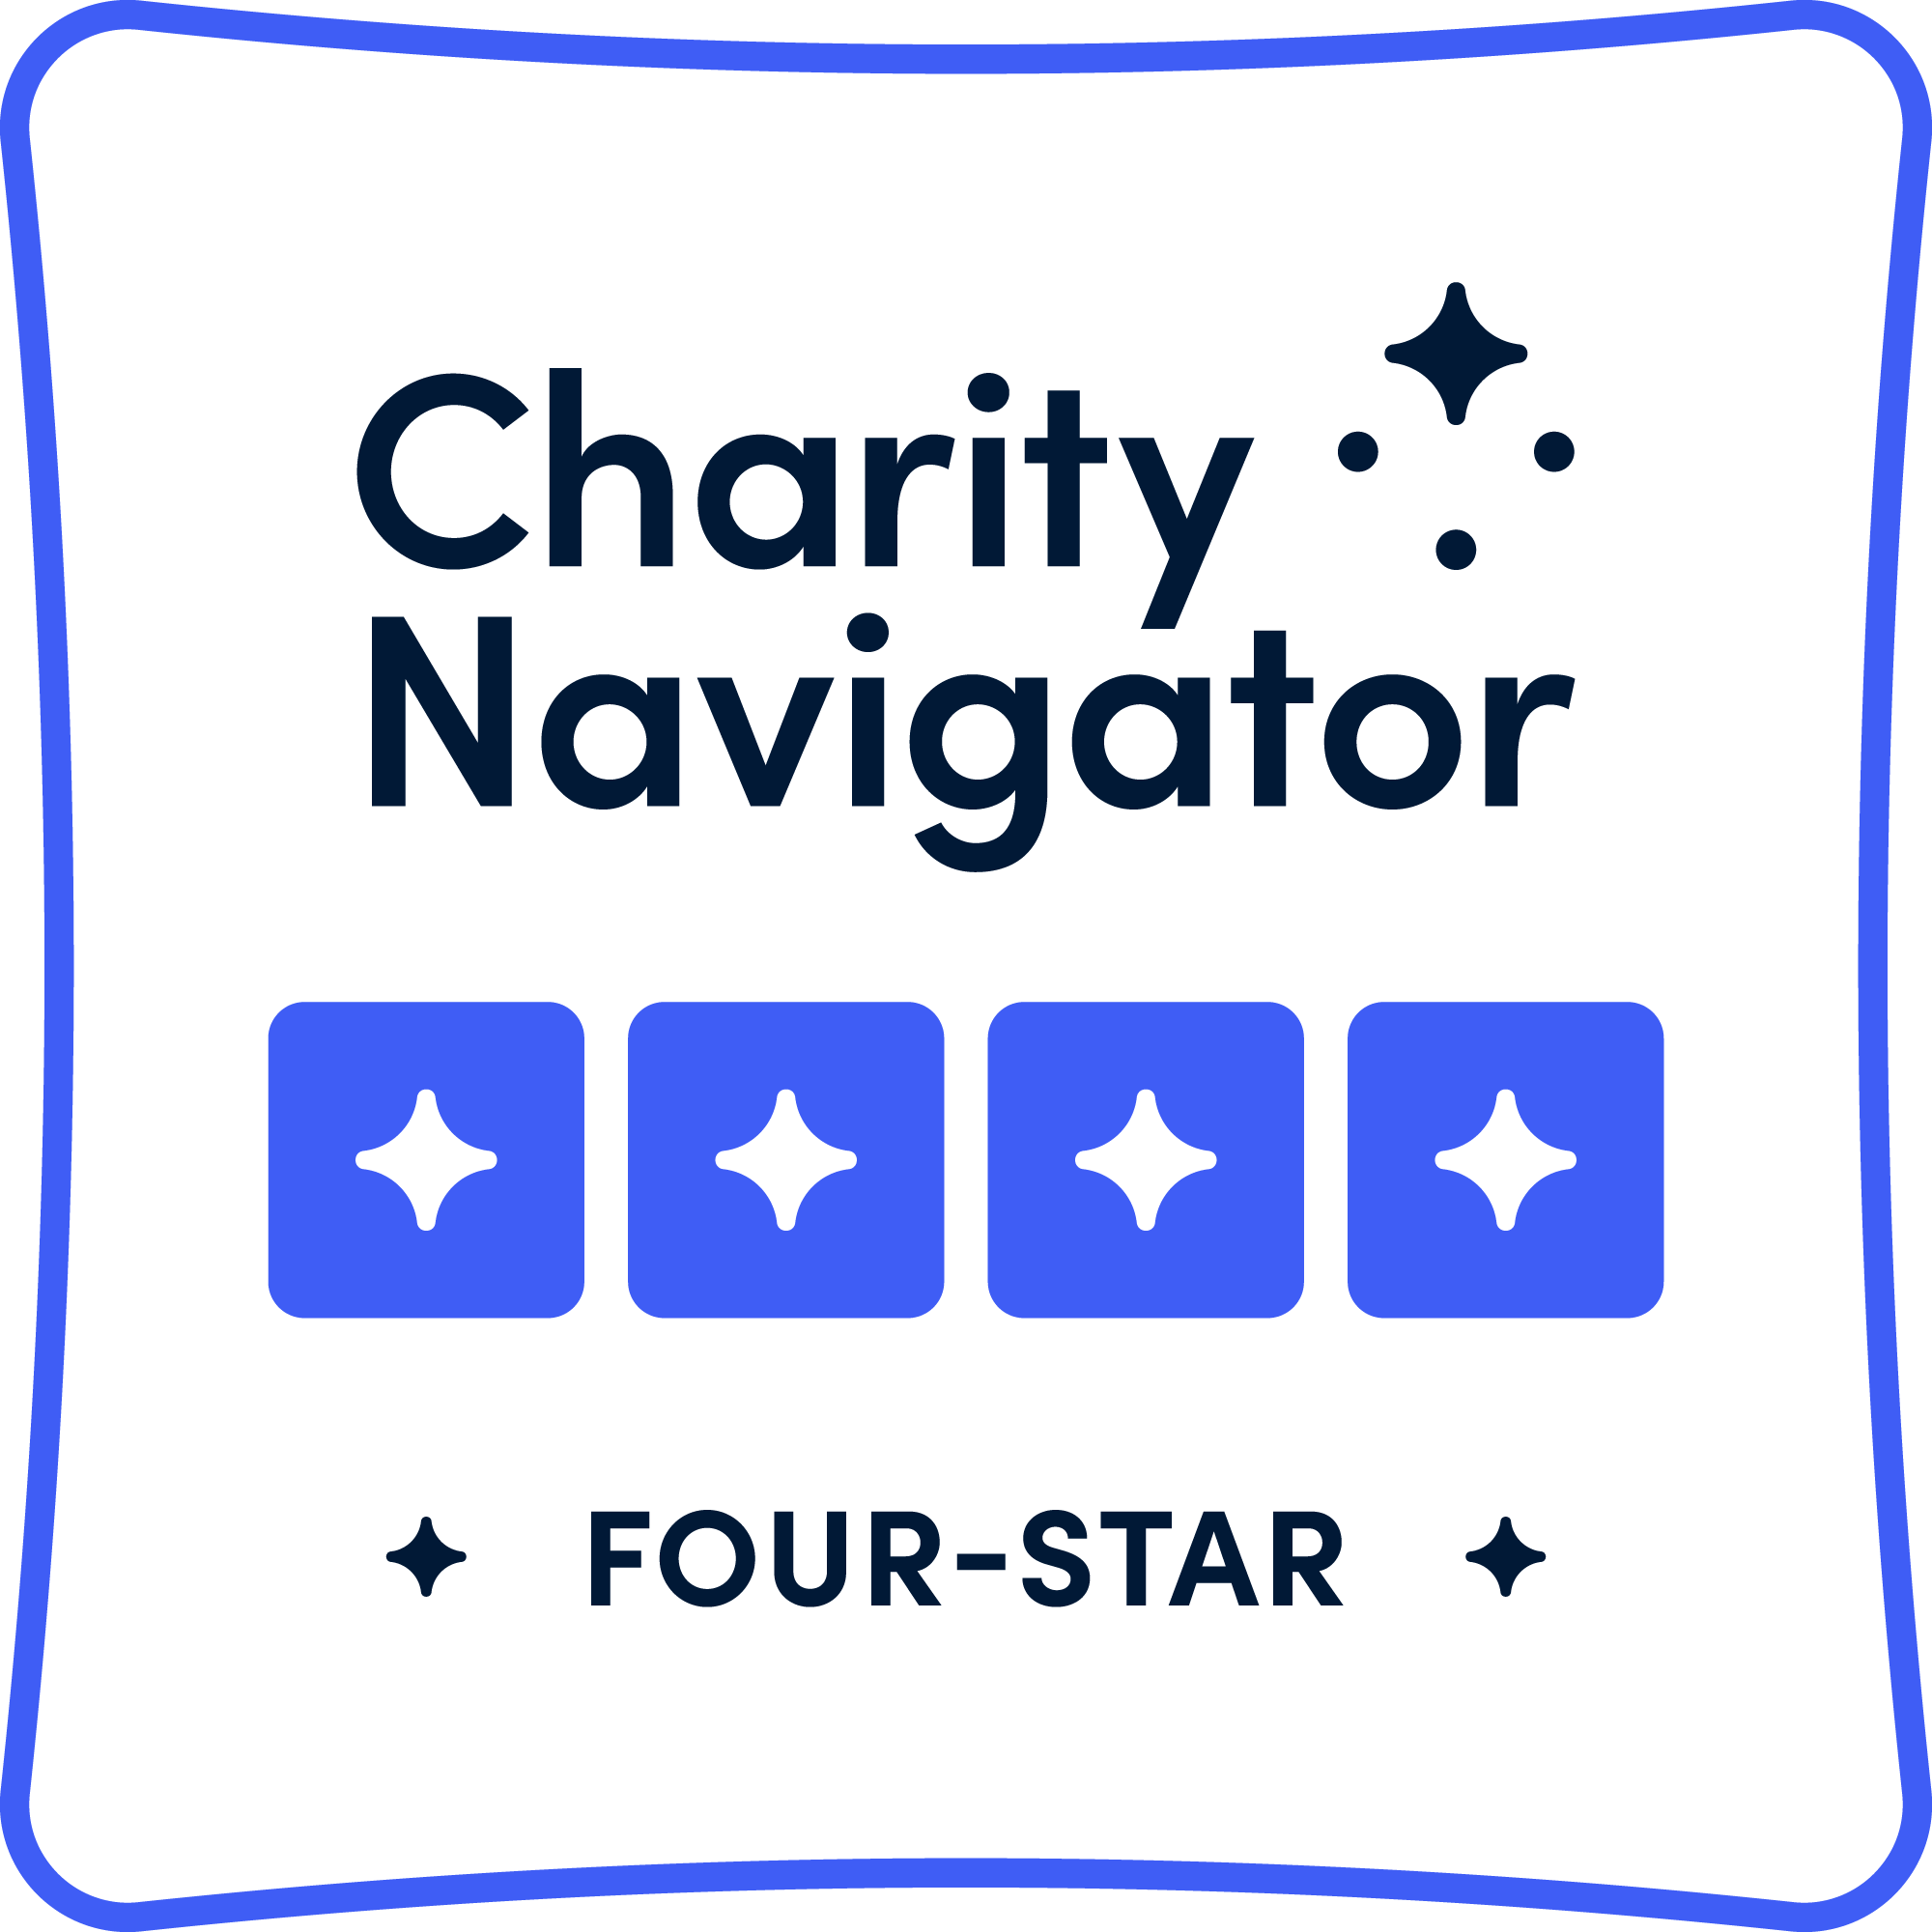 Pittsburgh Opera has received a 4-star rating from Charity Navigator, their highest.